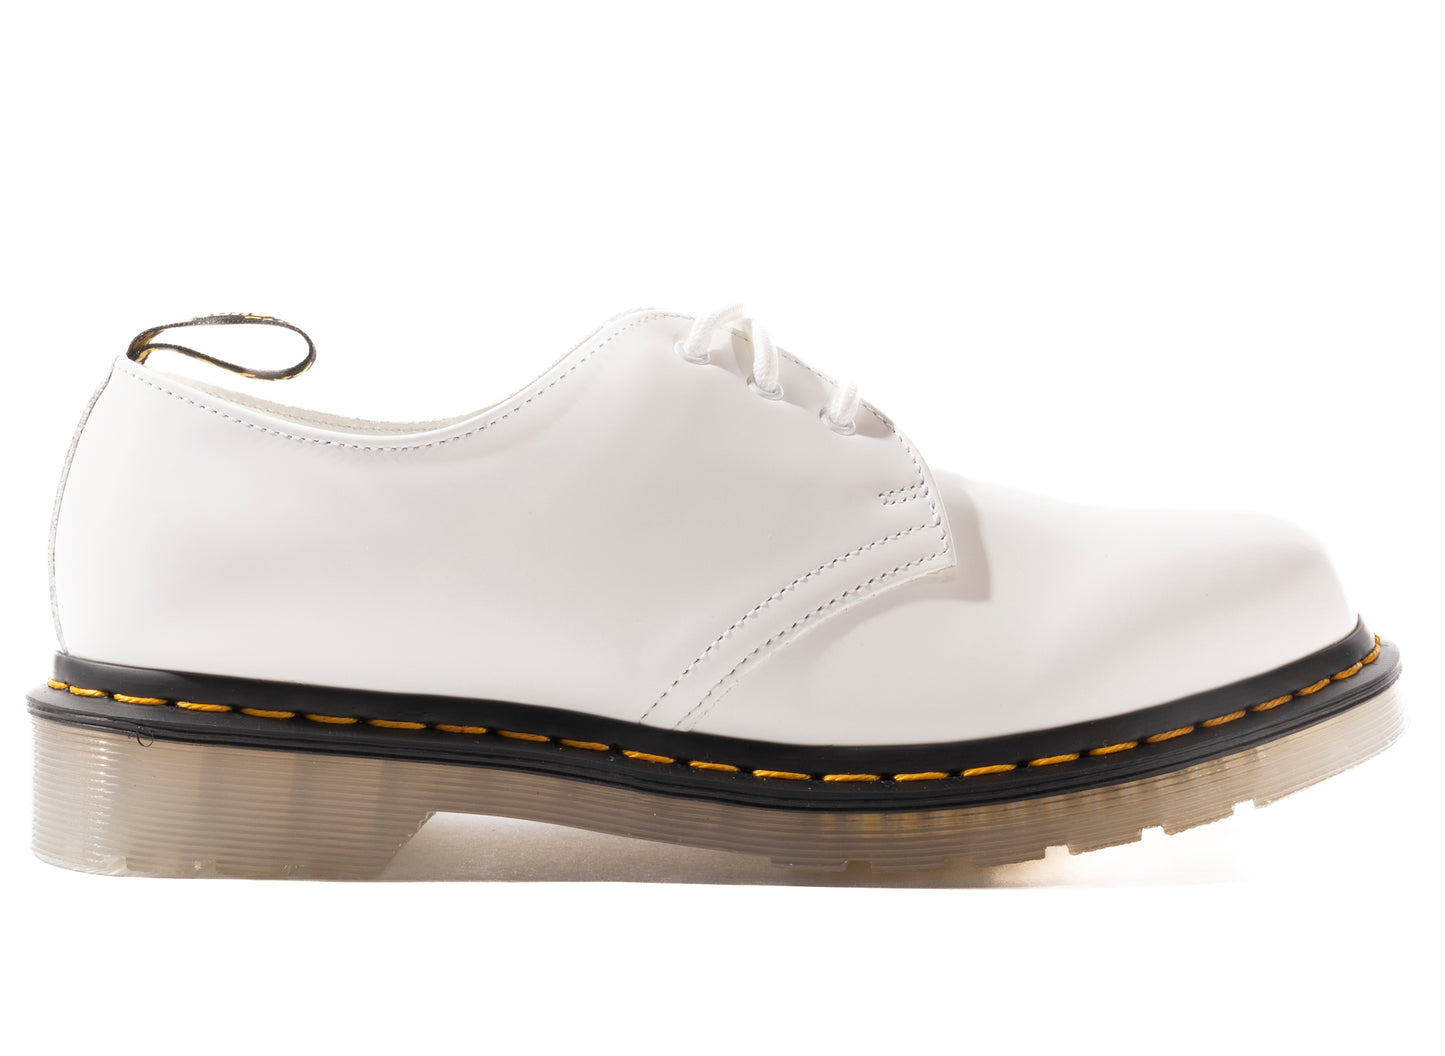 Dr. Martens Iced White Smooth 1461 Boots